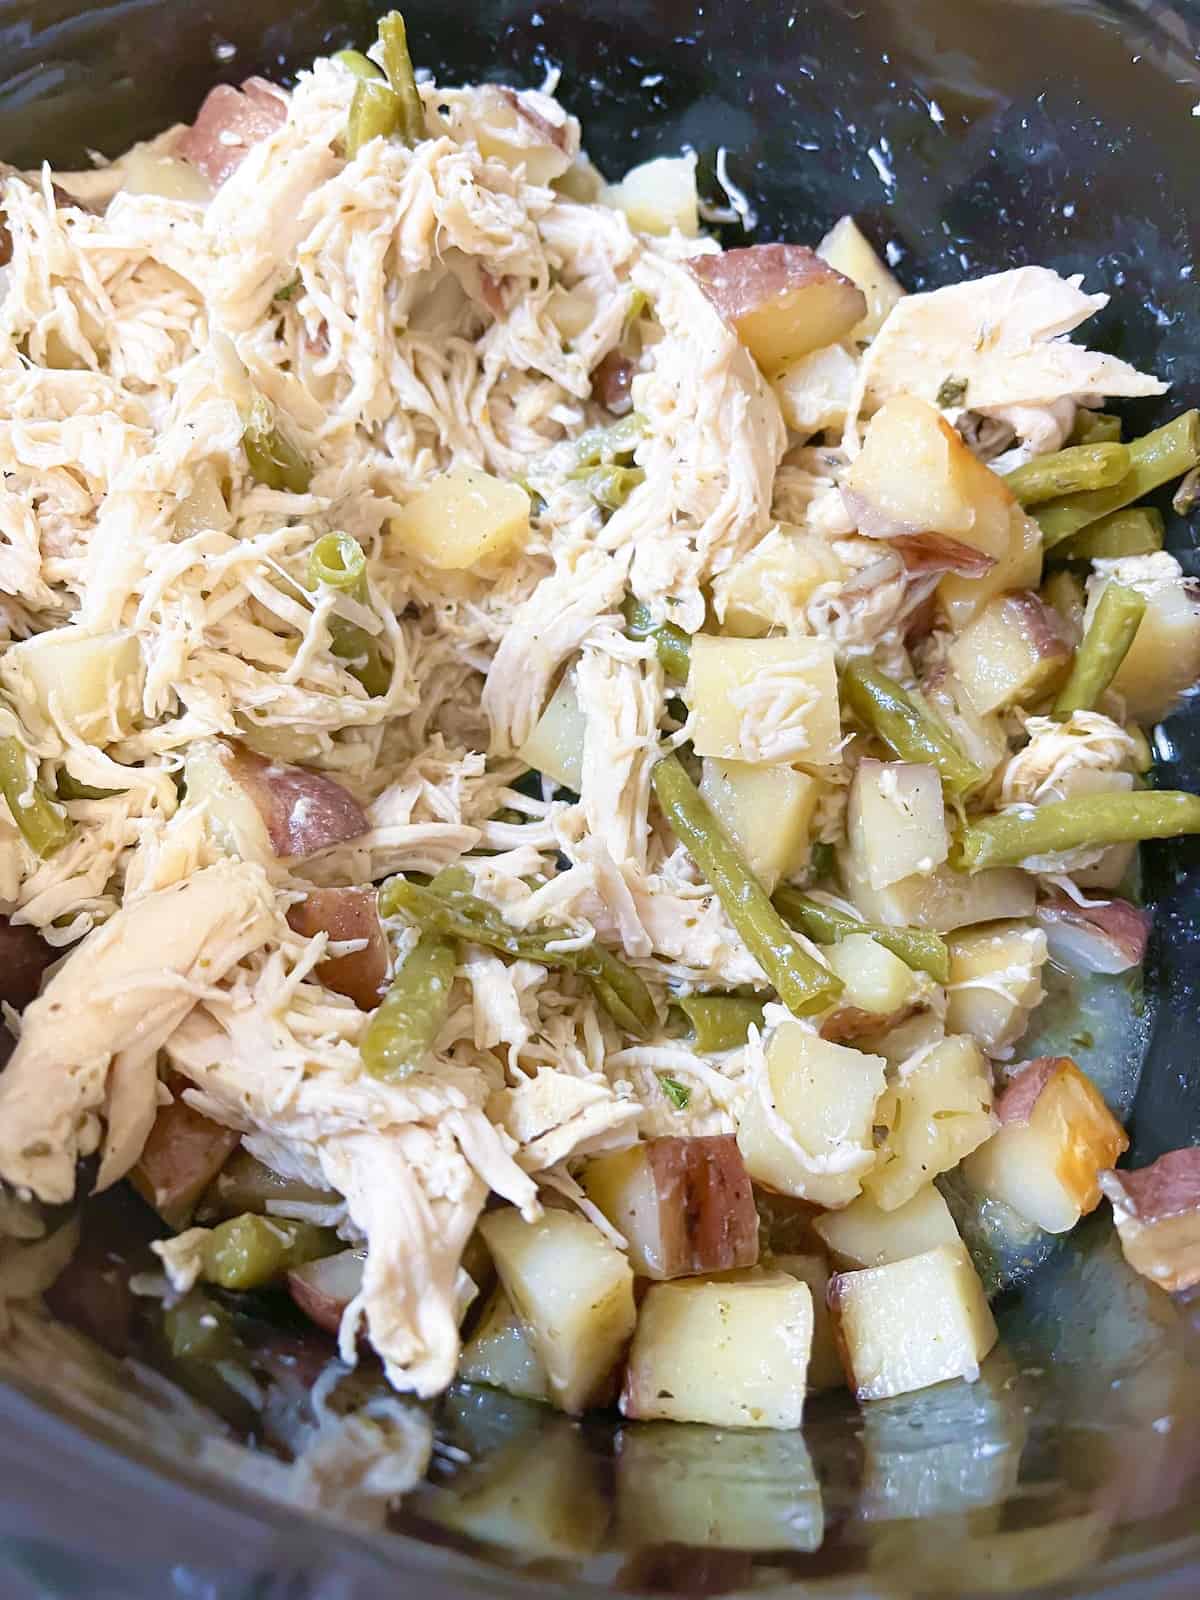 Slow Cooker chicken, green beans and potatoes with shredded chicken